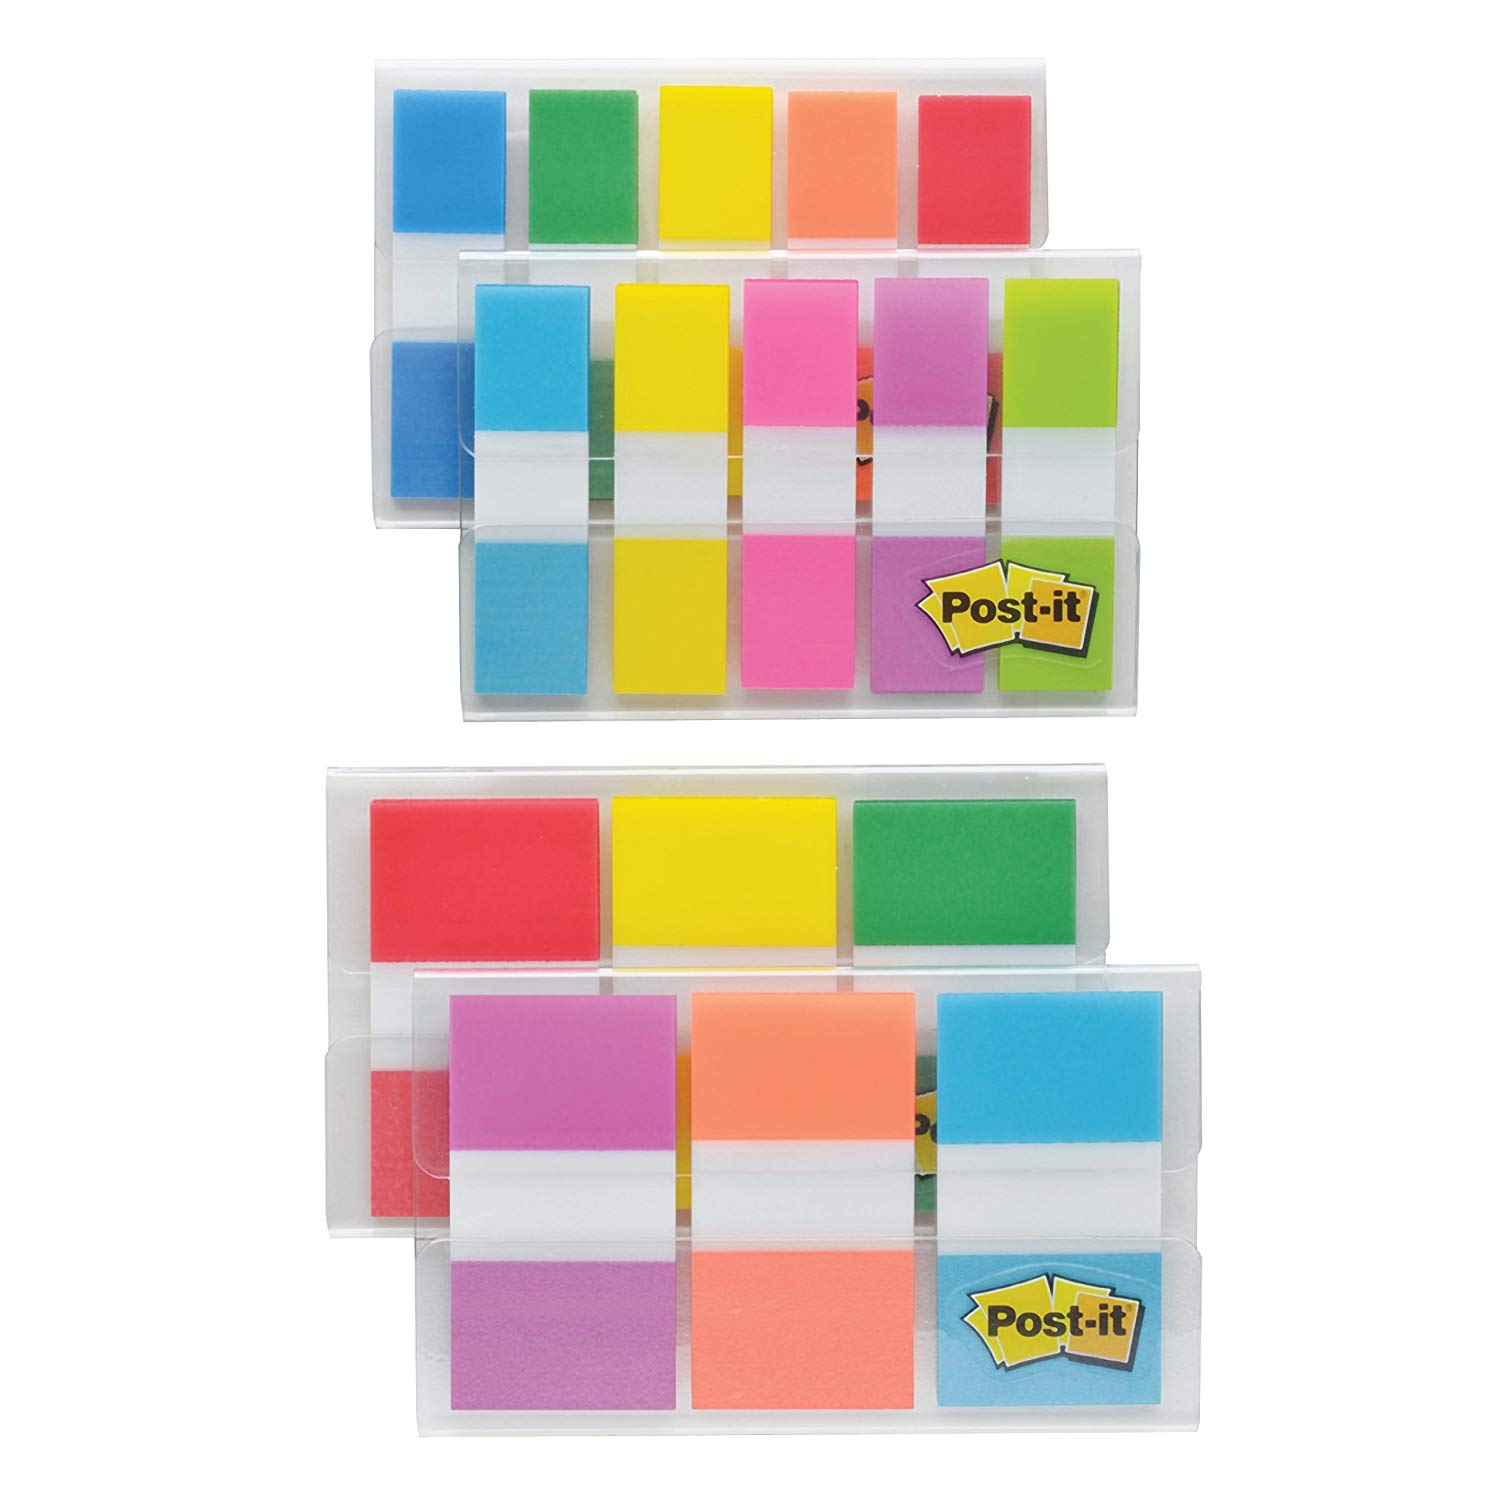 Post-it Flags Assorted Color Combo Pack, 320 Flags Total – Only $6.31!